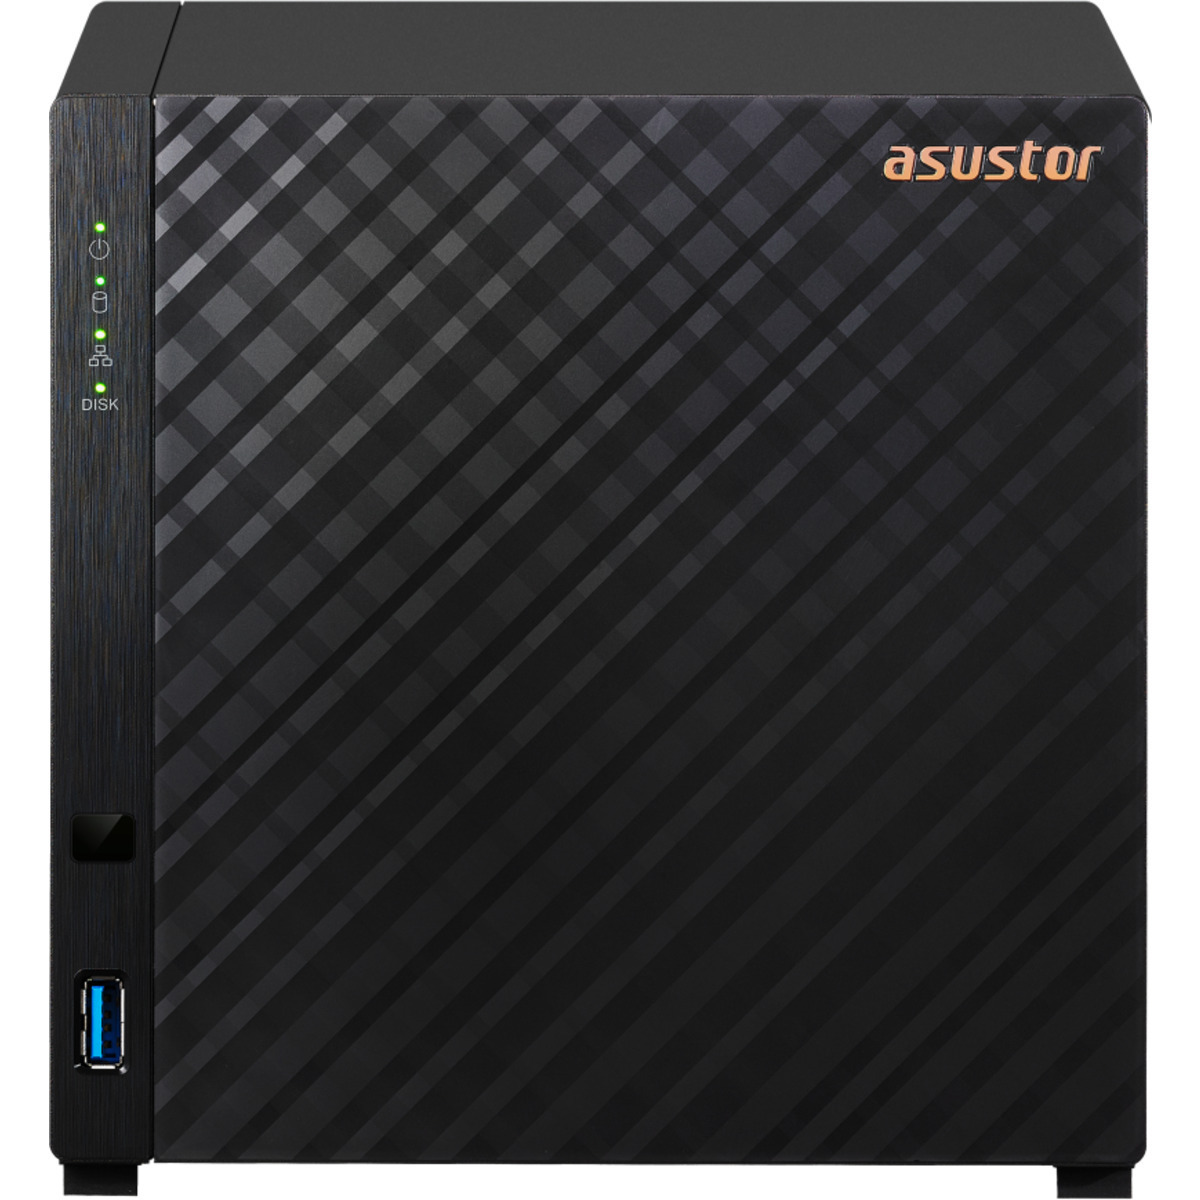 ASUSTOR DRIVESTOR 4 AS1104T 1.5tb 4-Bay Desktop Personal / Basic Home / Small Office NAS - Network Attached Storage Device 3x500gb Crucial MX500 CT500MX500SSD1 2.5 560/510MB/s SATA 6Gb/s SSD CONSUMER Class Drives Installed - Burn-In Tested DRIVESTOR 4 AS1104T